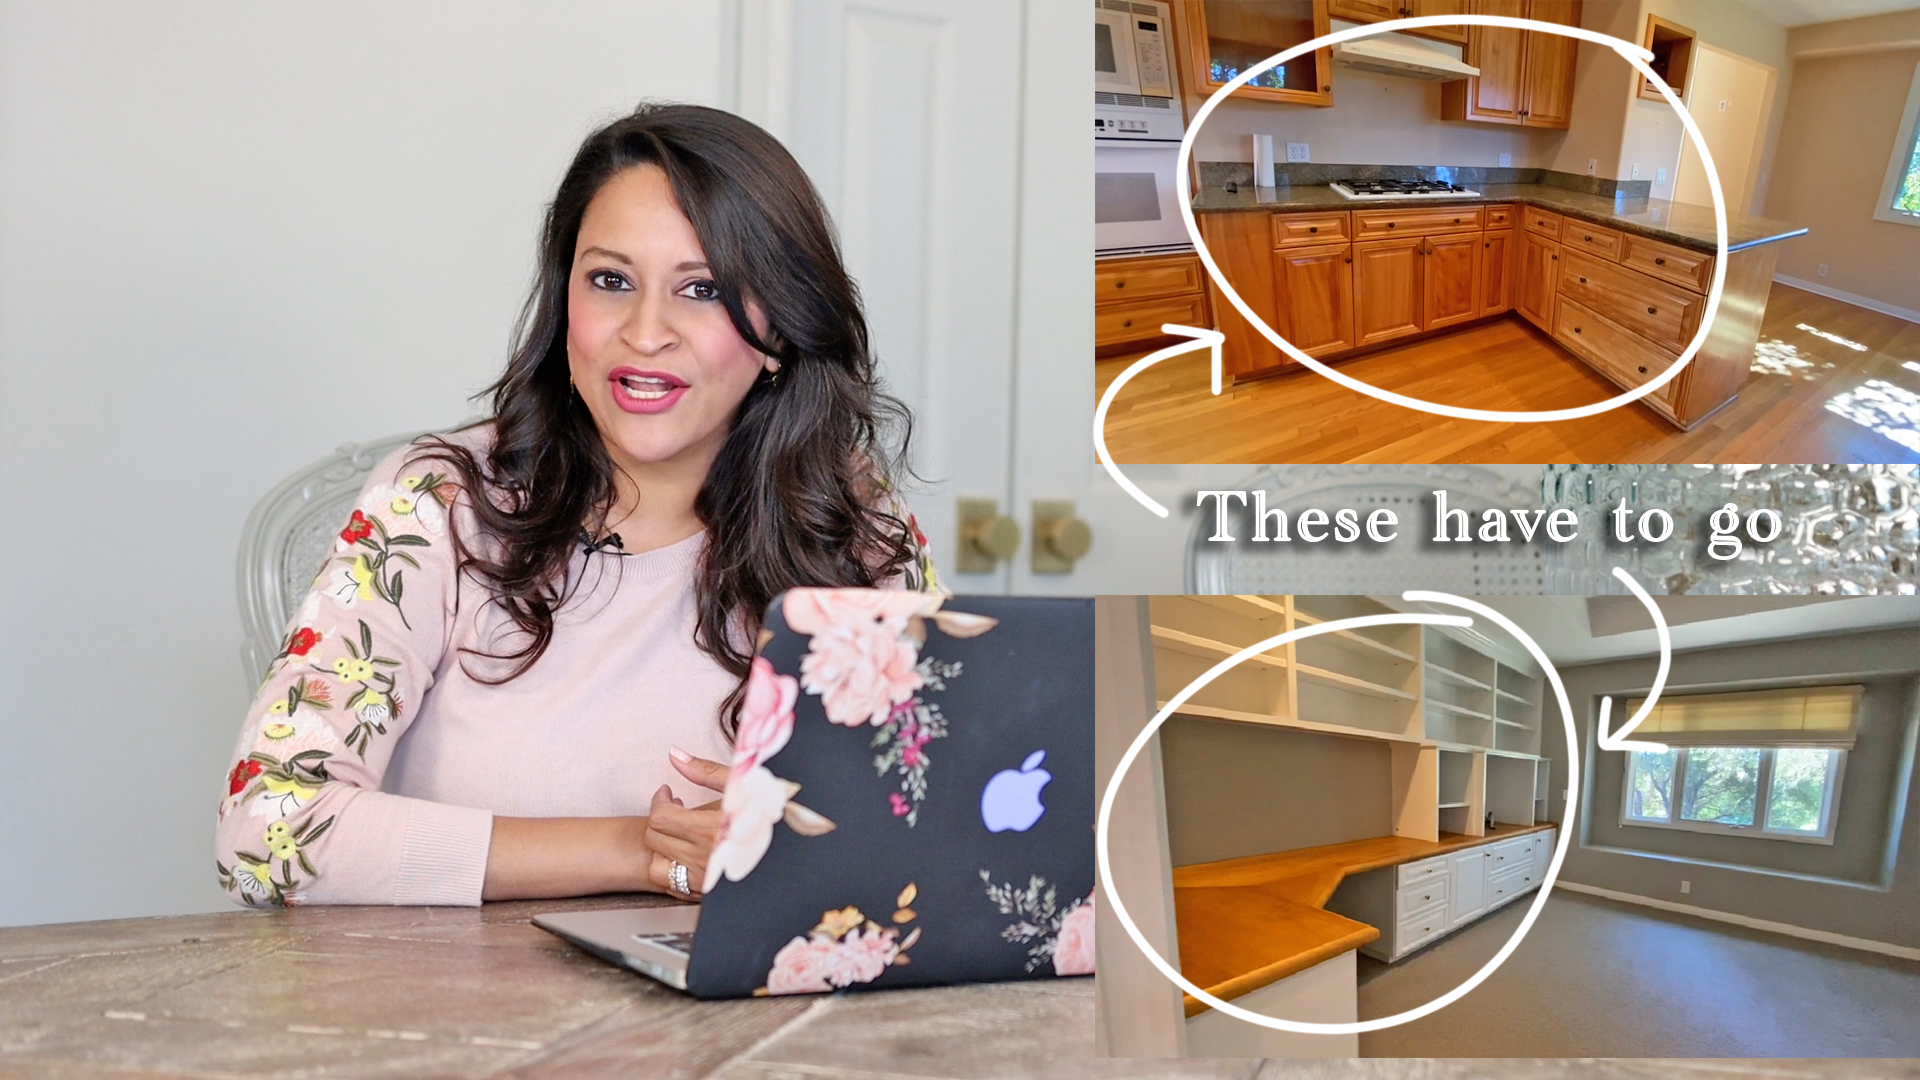 See step one of how Amitha Verma plans to revive this Spanish style home renovation in California with a full modernized remodel